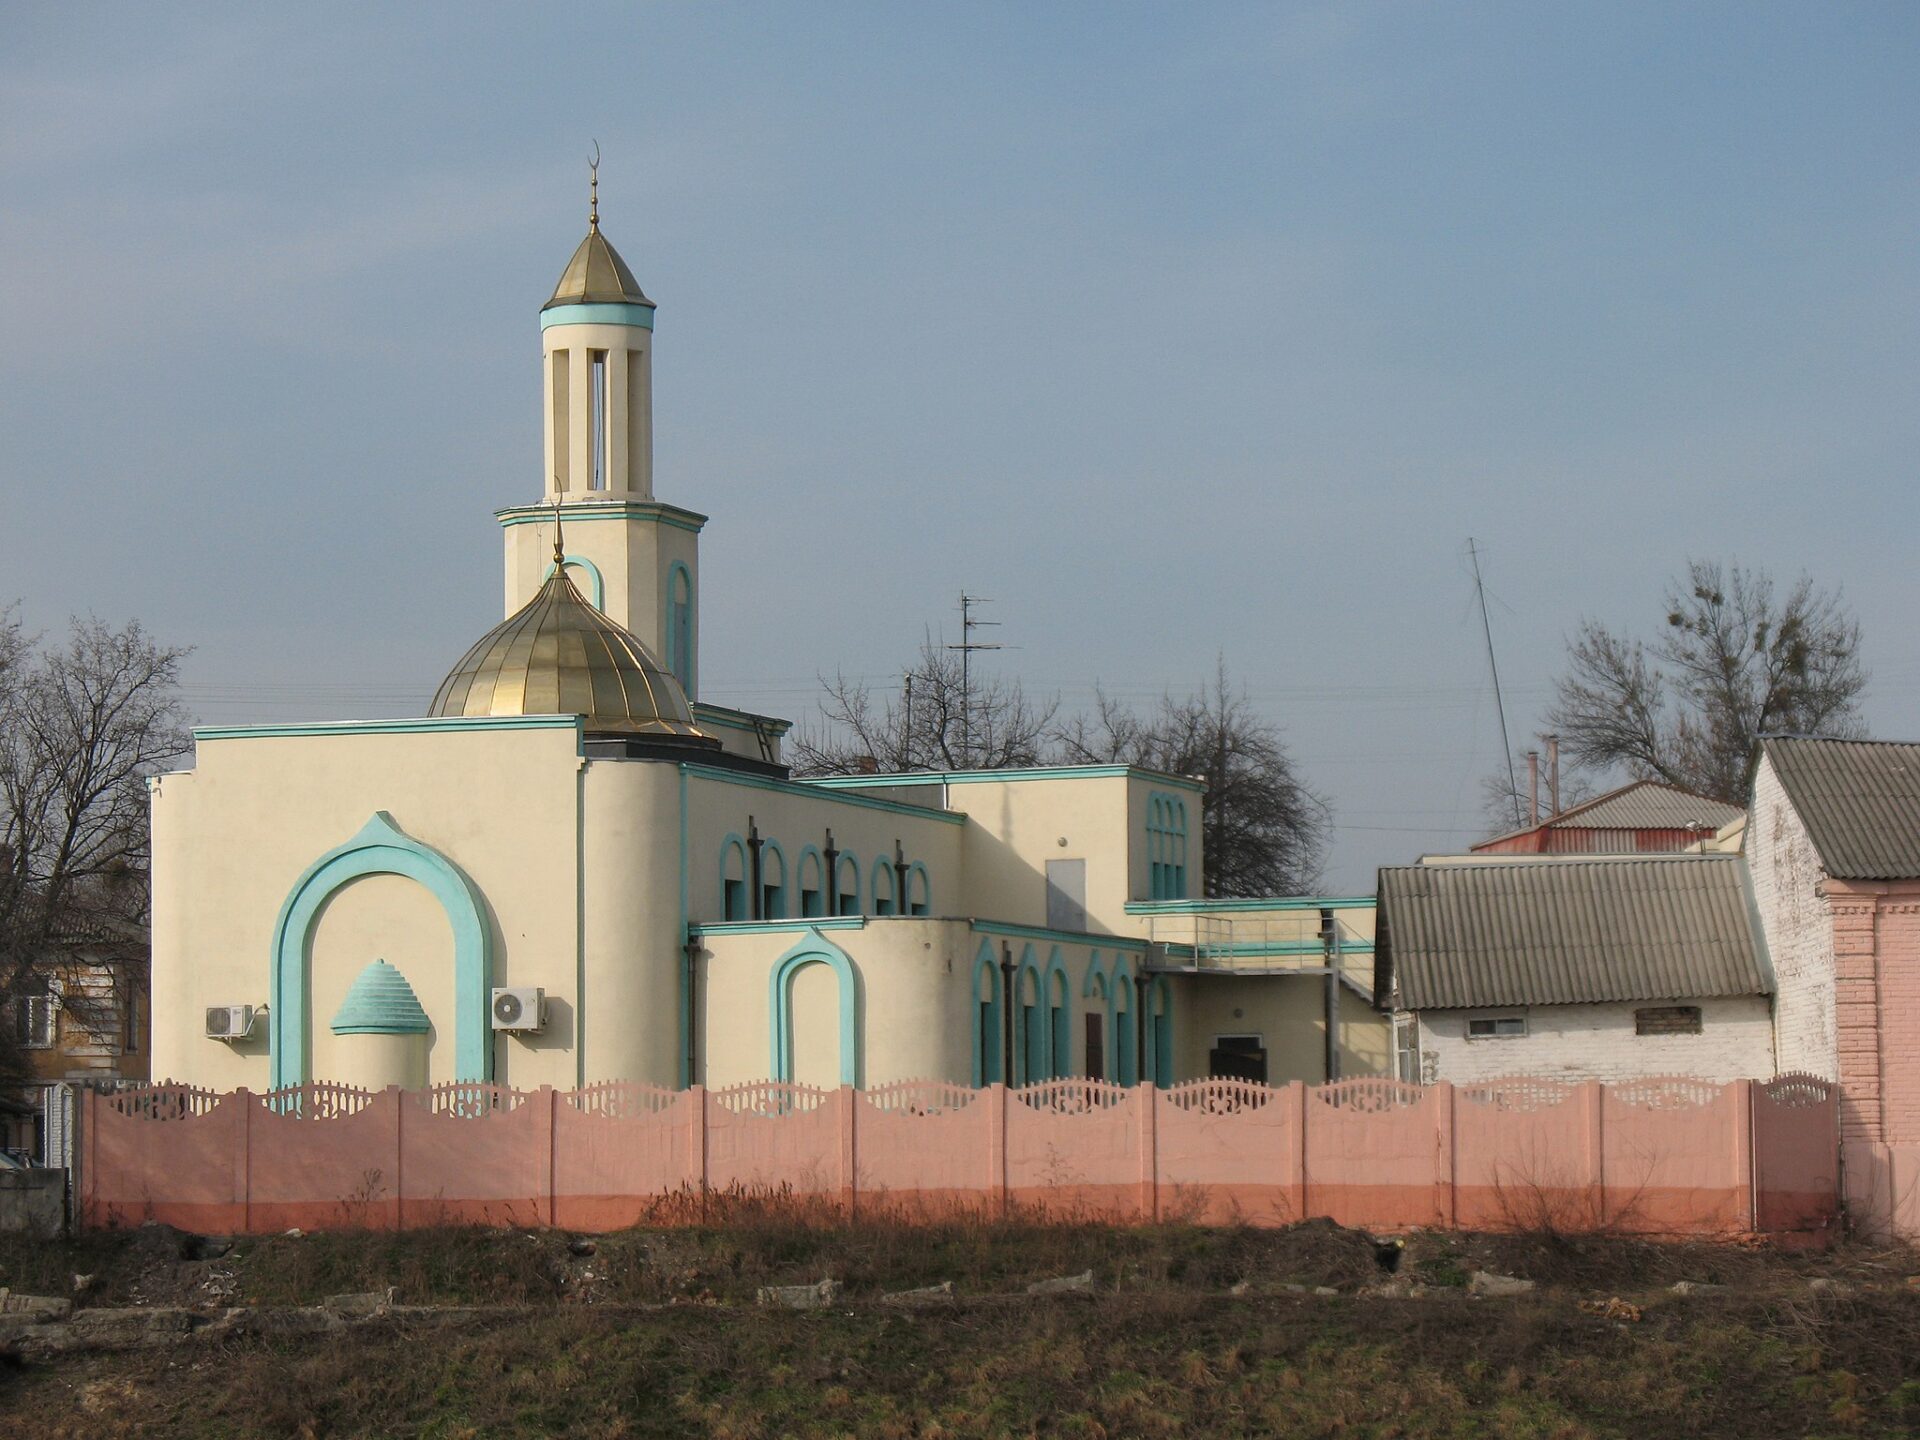 This mosque is located in Ukraine's Kharkiv, where it was photographed in 2014 (Vizu via Wikimedia Commons)